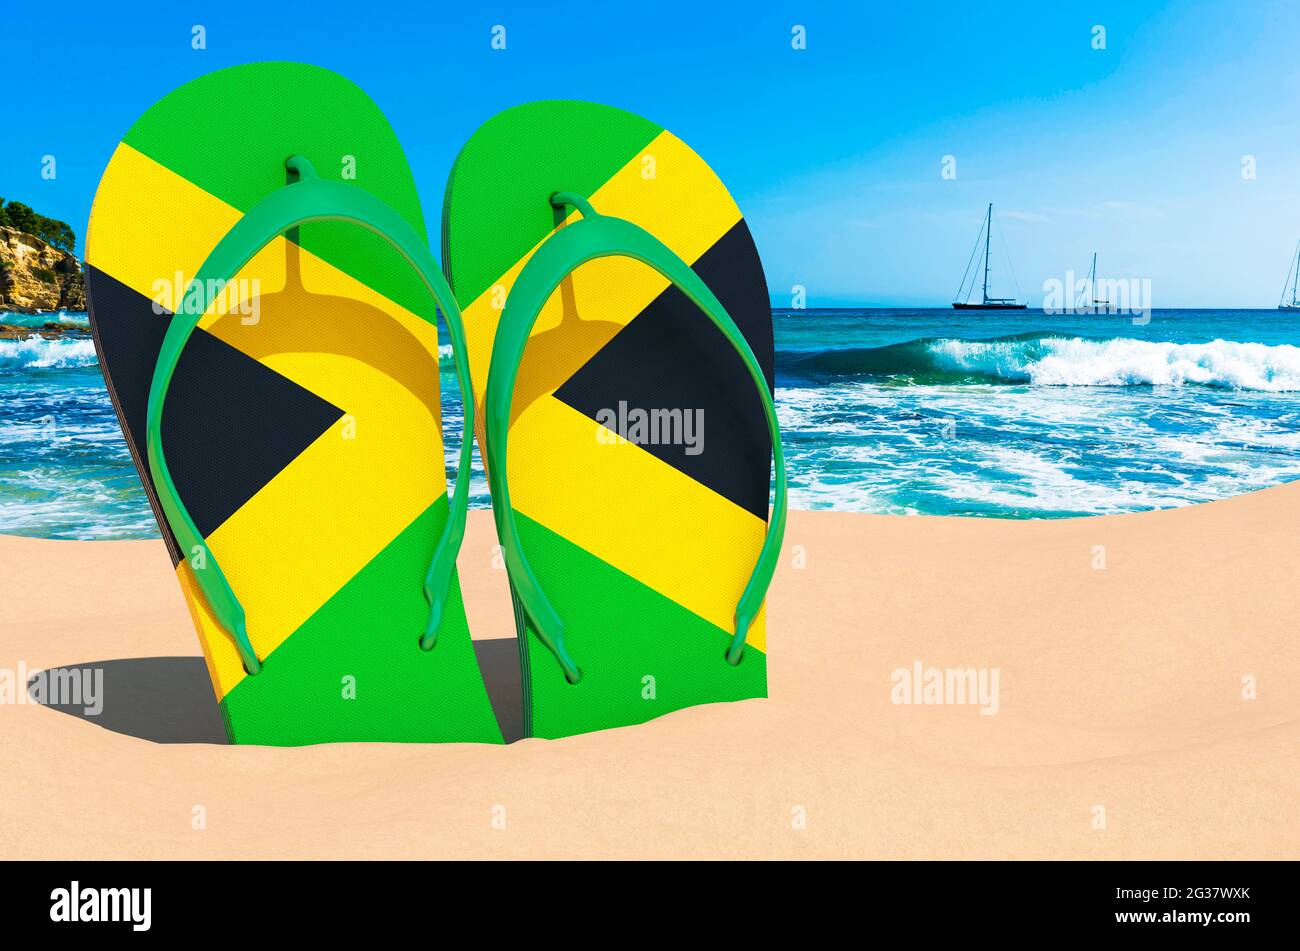 Flip flops with Jamaican flag on the beach. Jamaica resorts, vacation, tours, travel packages concept. 3D rendering Stock Photo